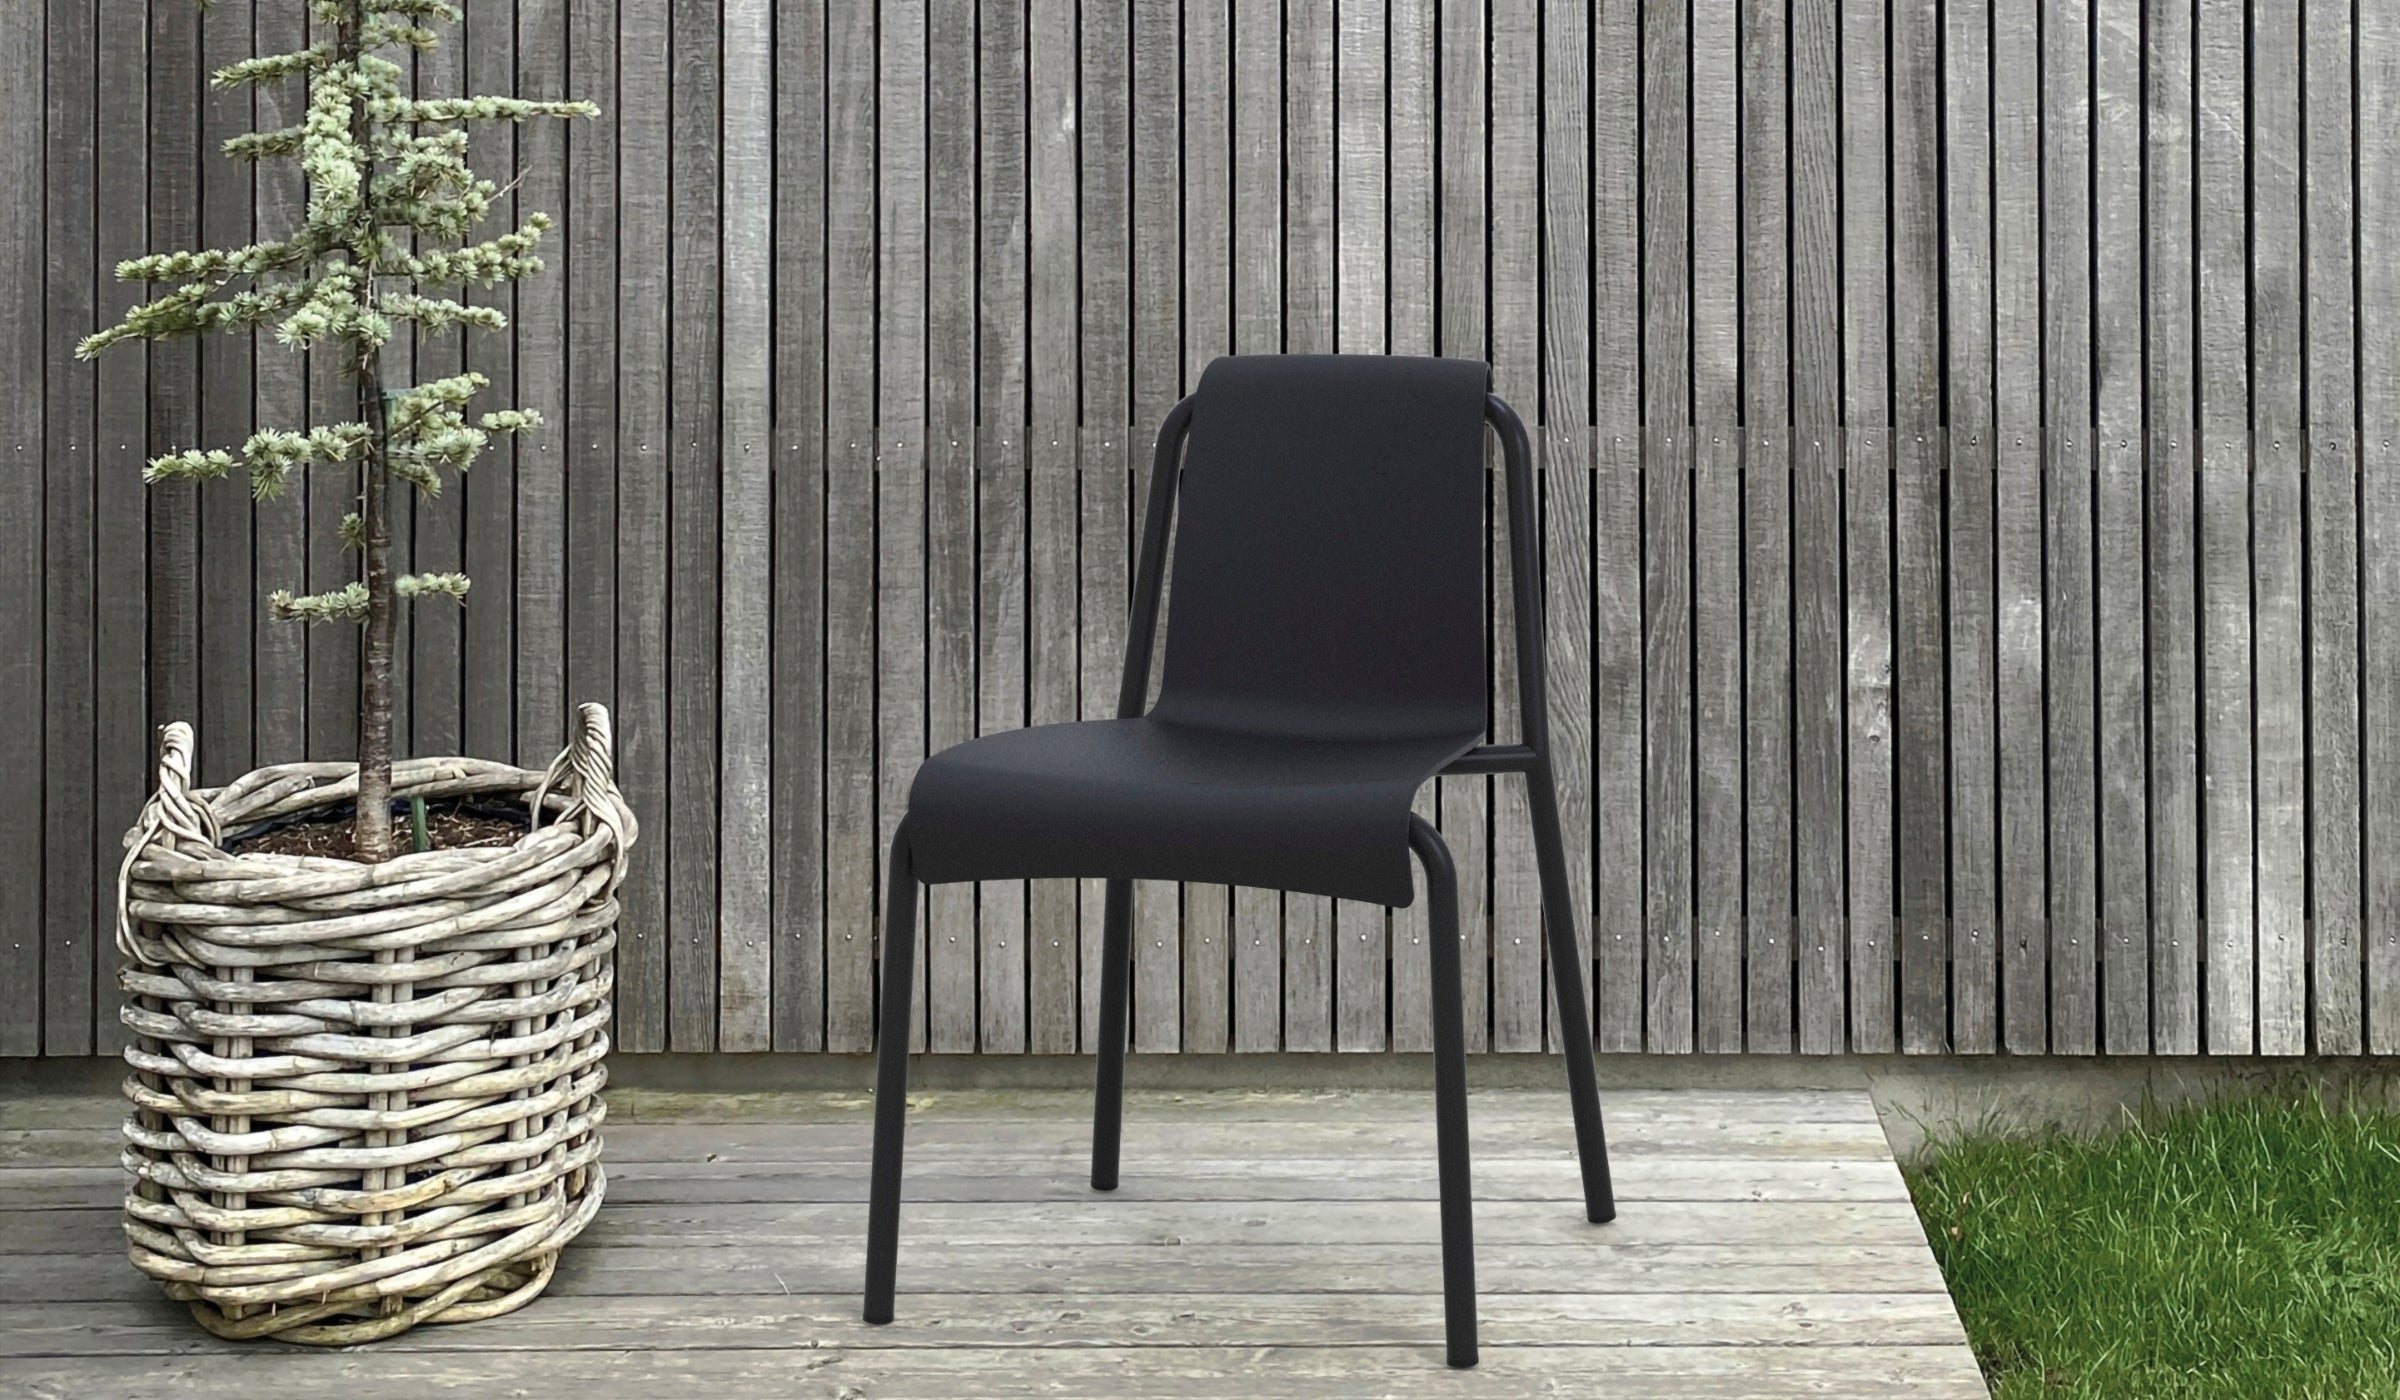 Nami - Designer outdoor chair in recycled plastic, black